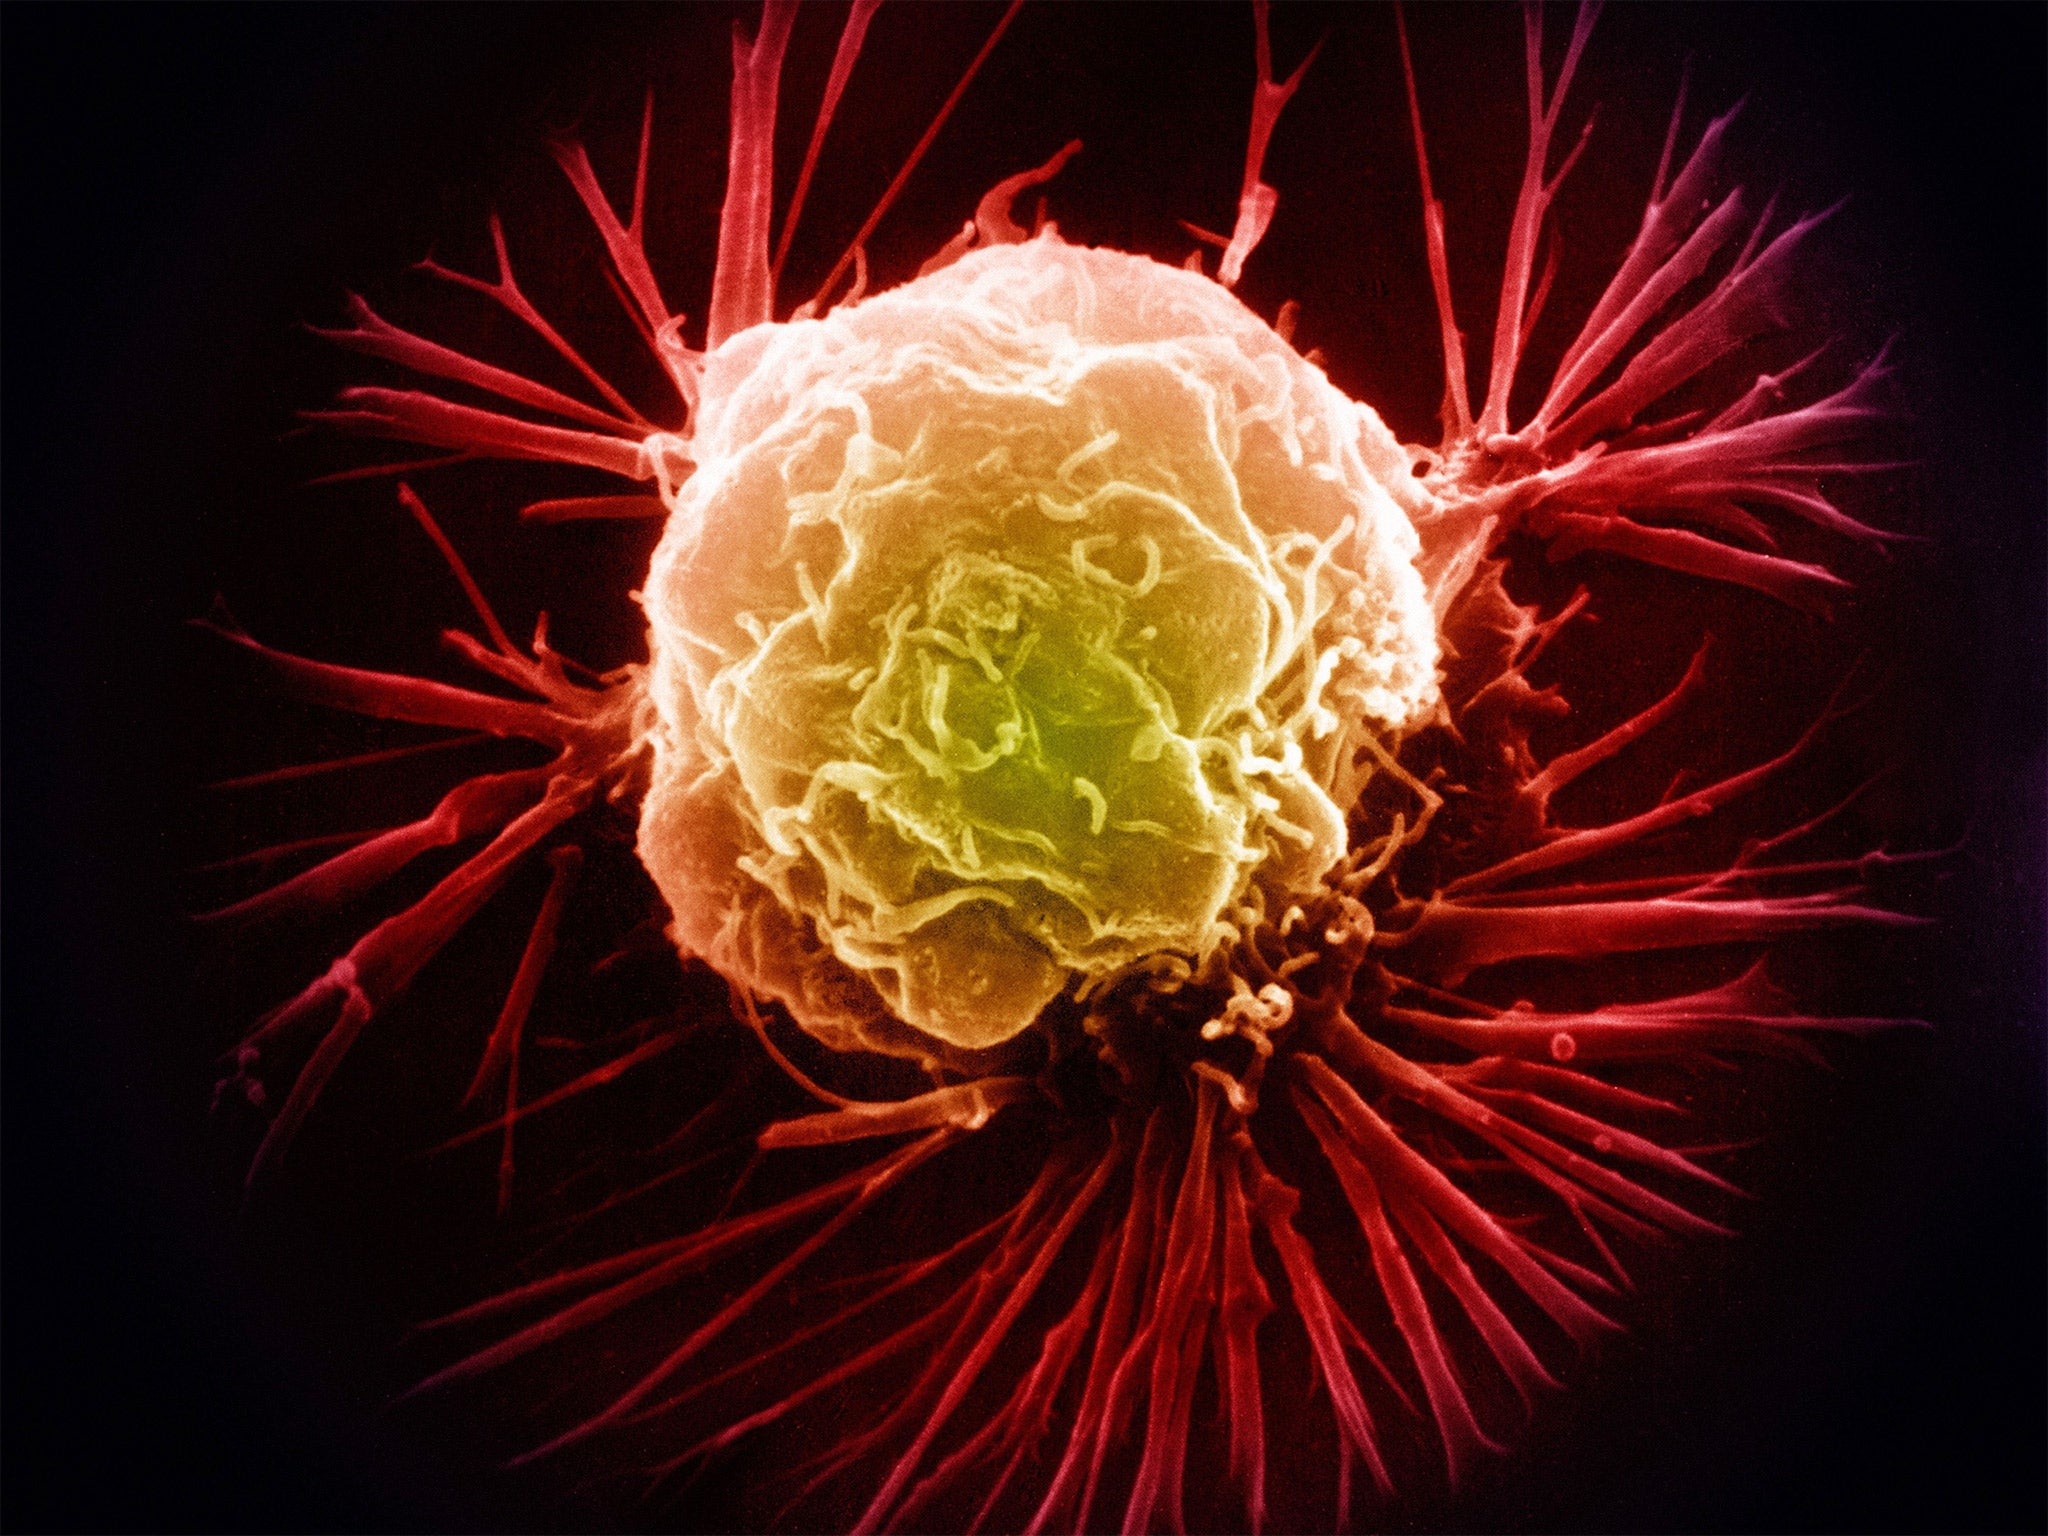 The immune system tries to fight cancer with T cells but usually loses the battle